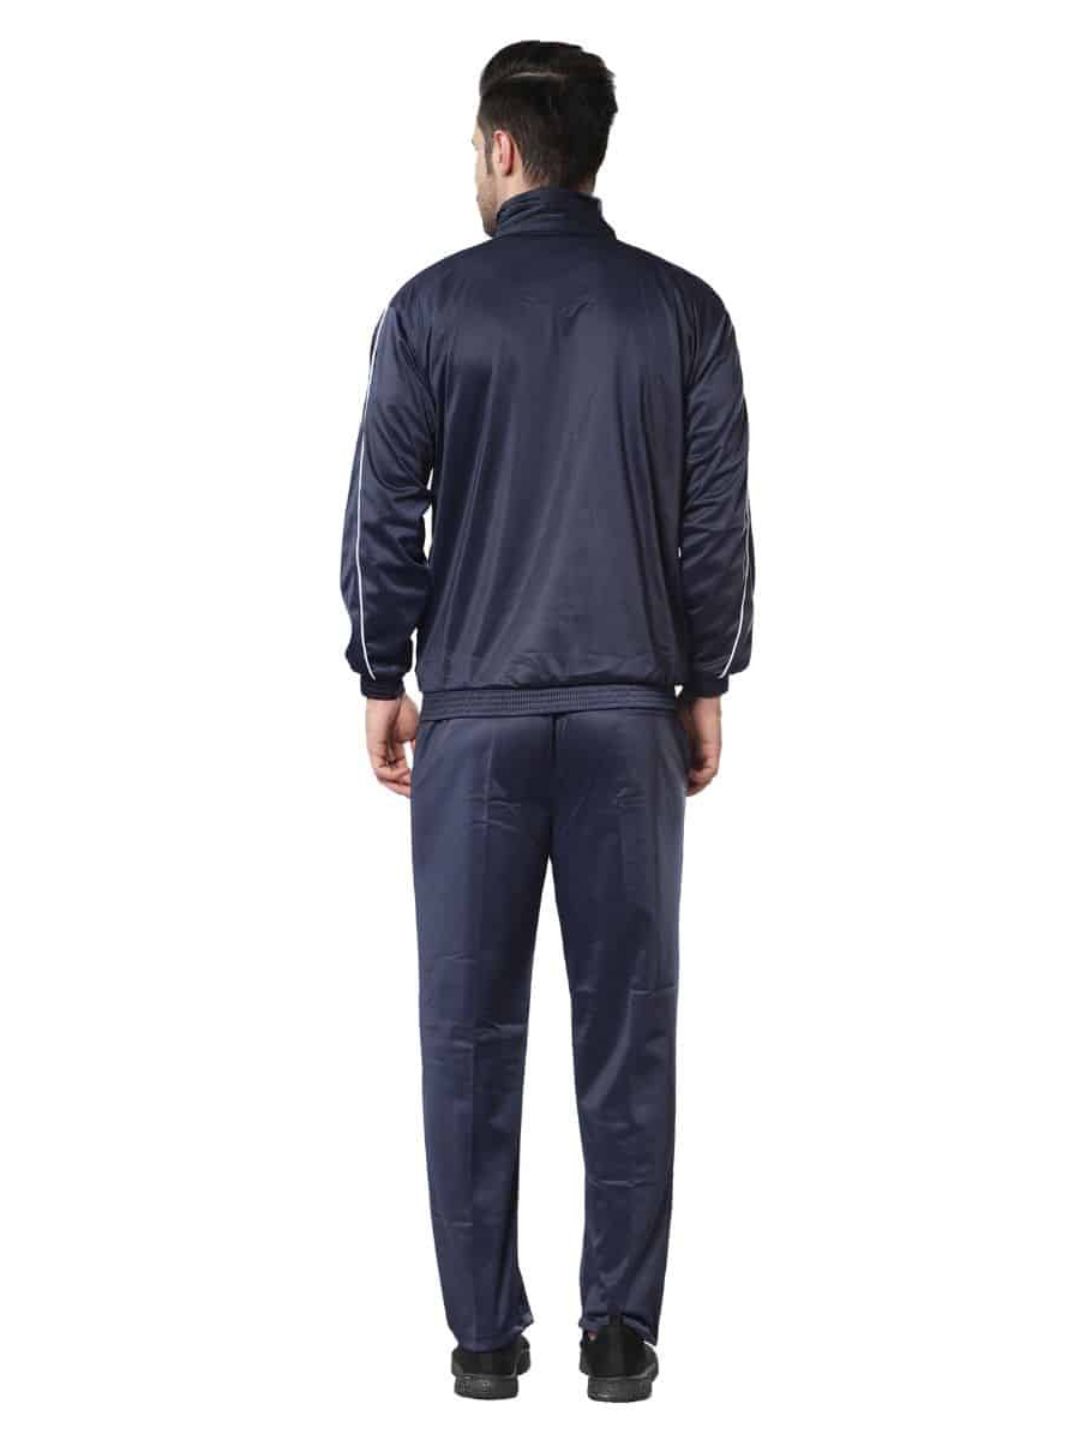 Kasrat Navy Blue With White Piping Super Poly Sport Wears Tracksuit